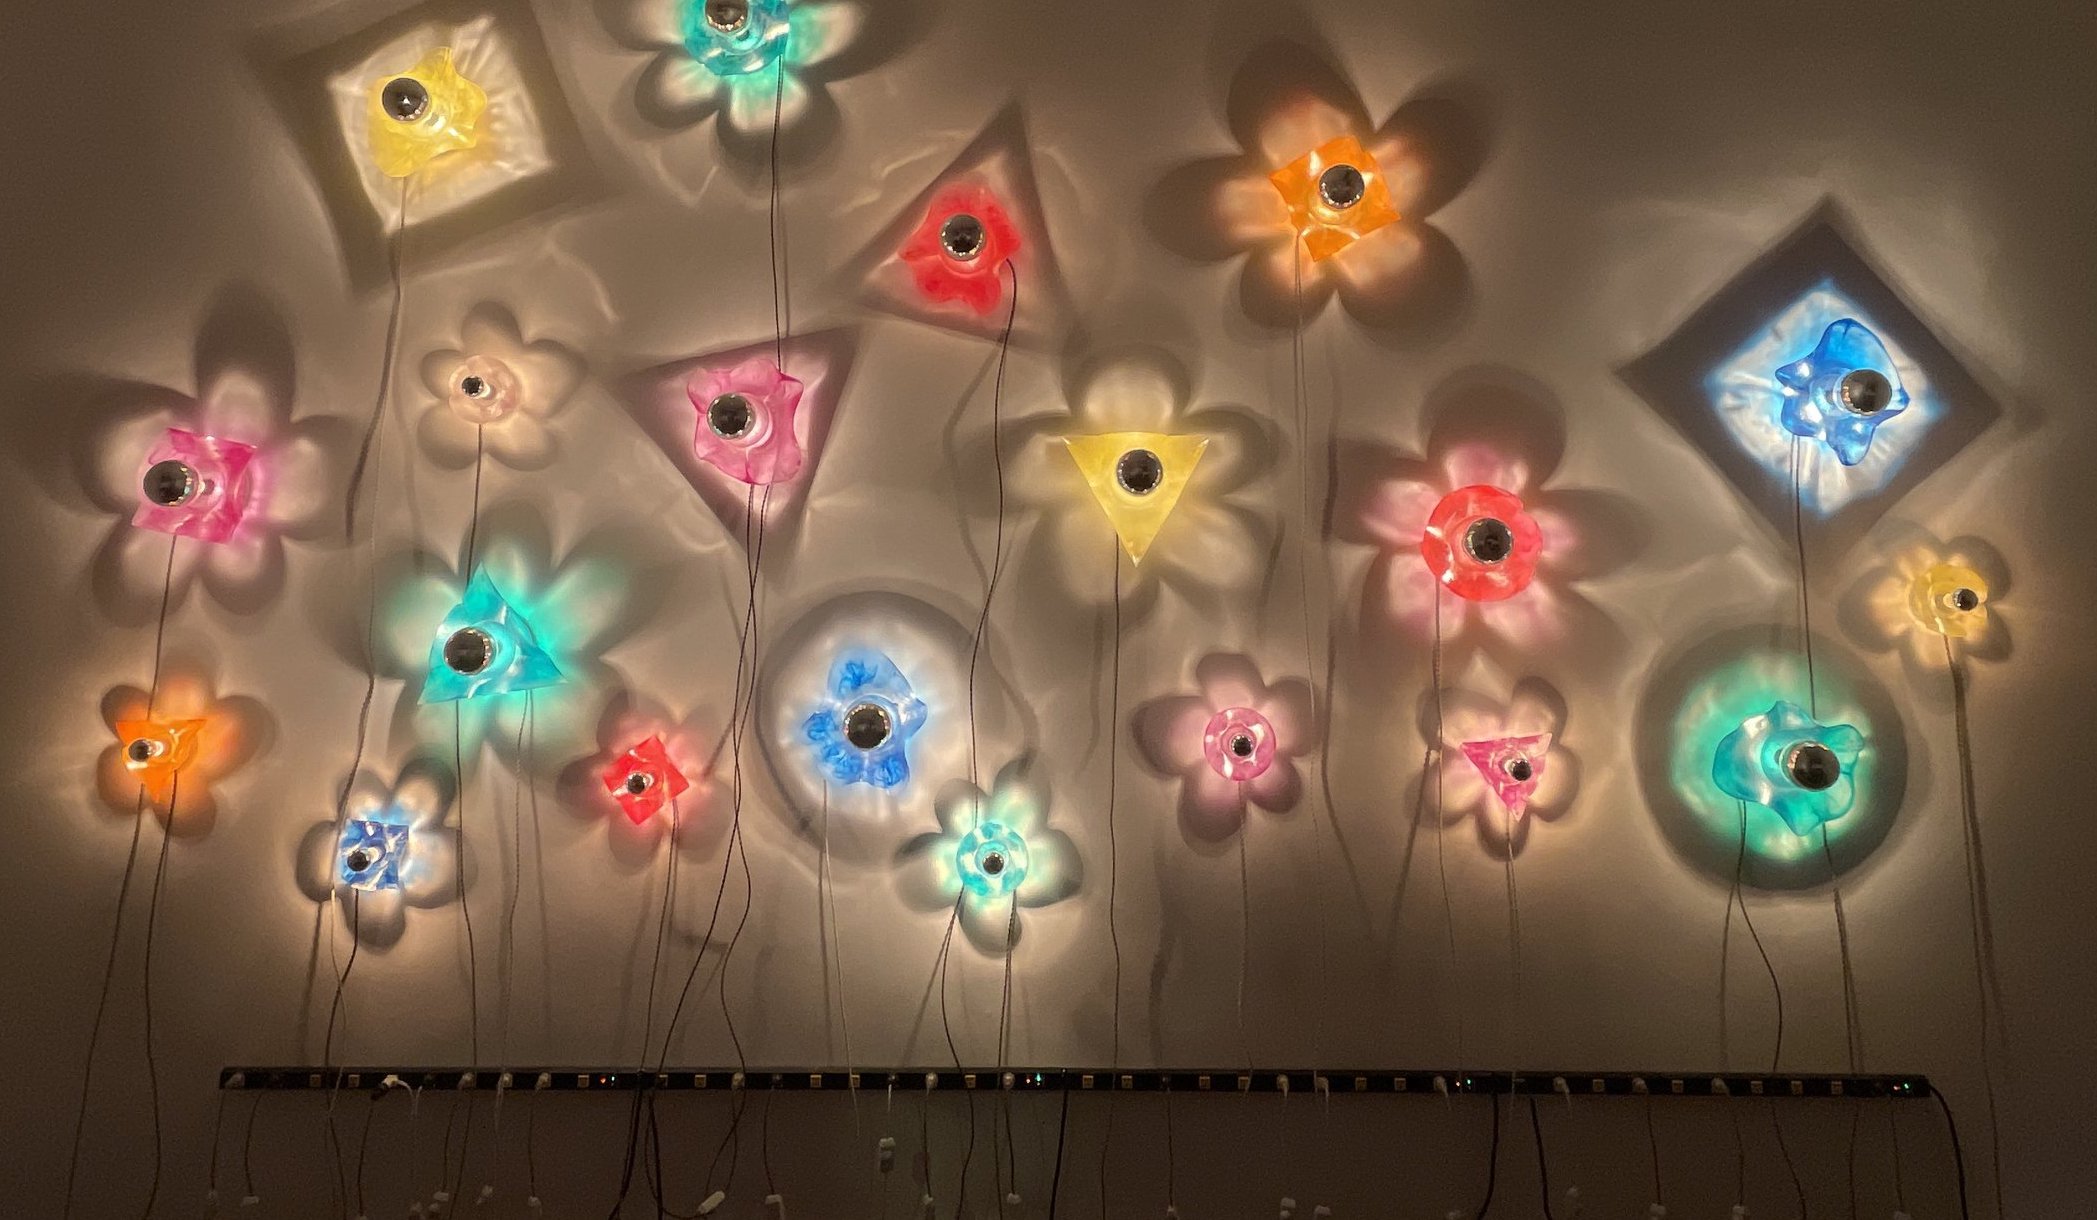 An array of colorful flower-shaped lights casting a vibrant glow against a wall.